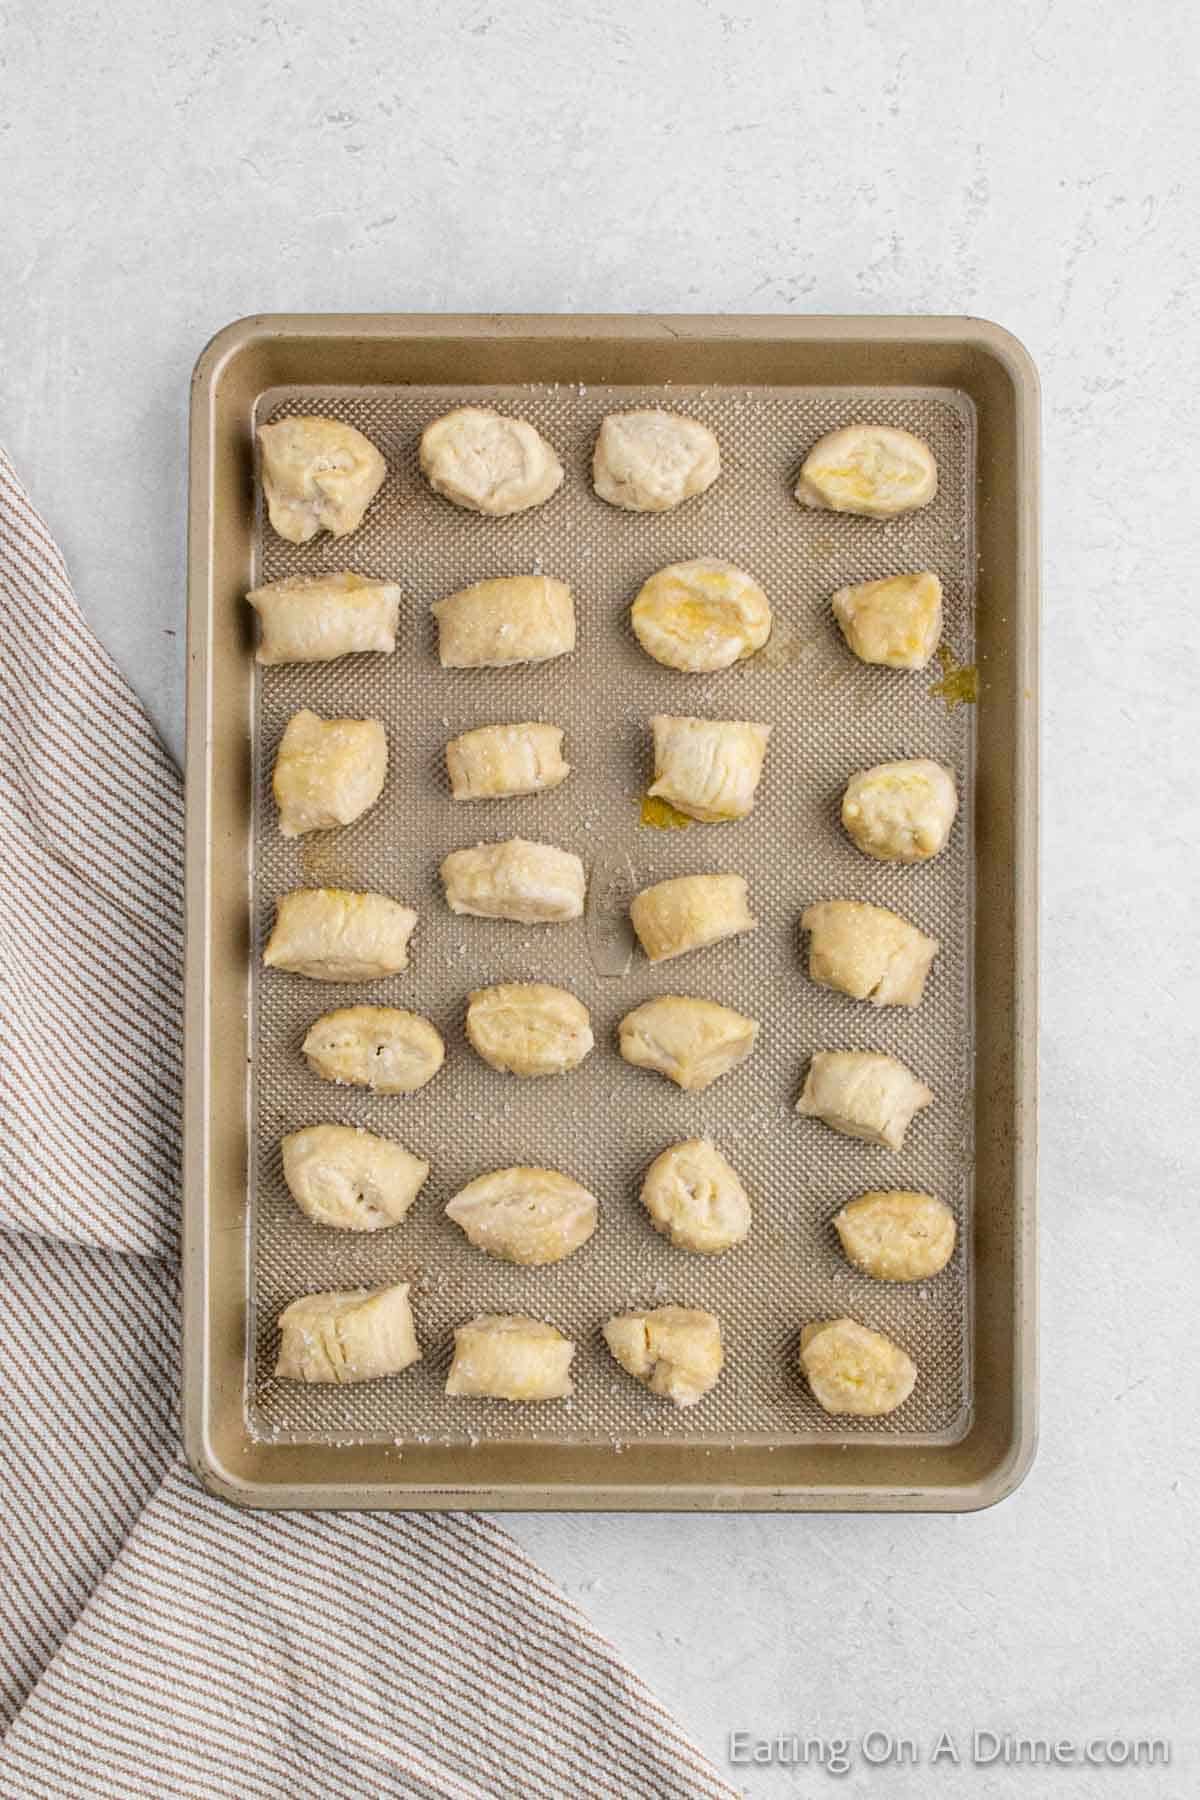 Placing the cooked dough pieces on a baking sheet